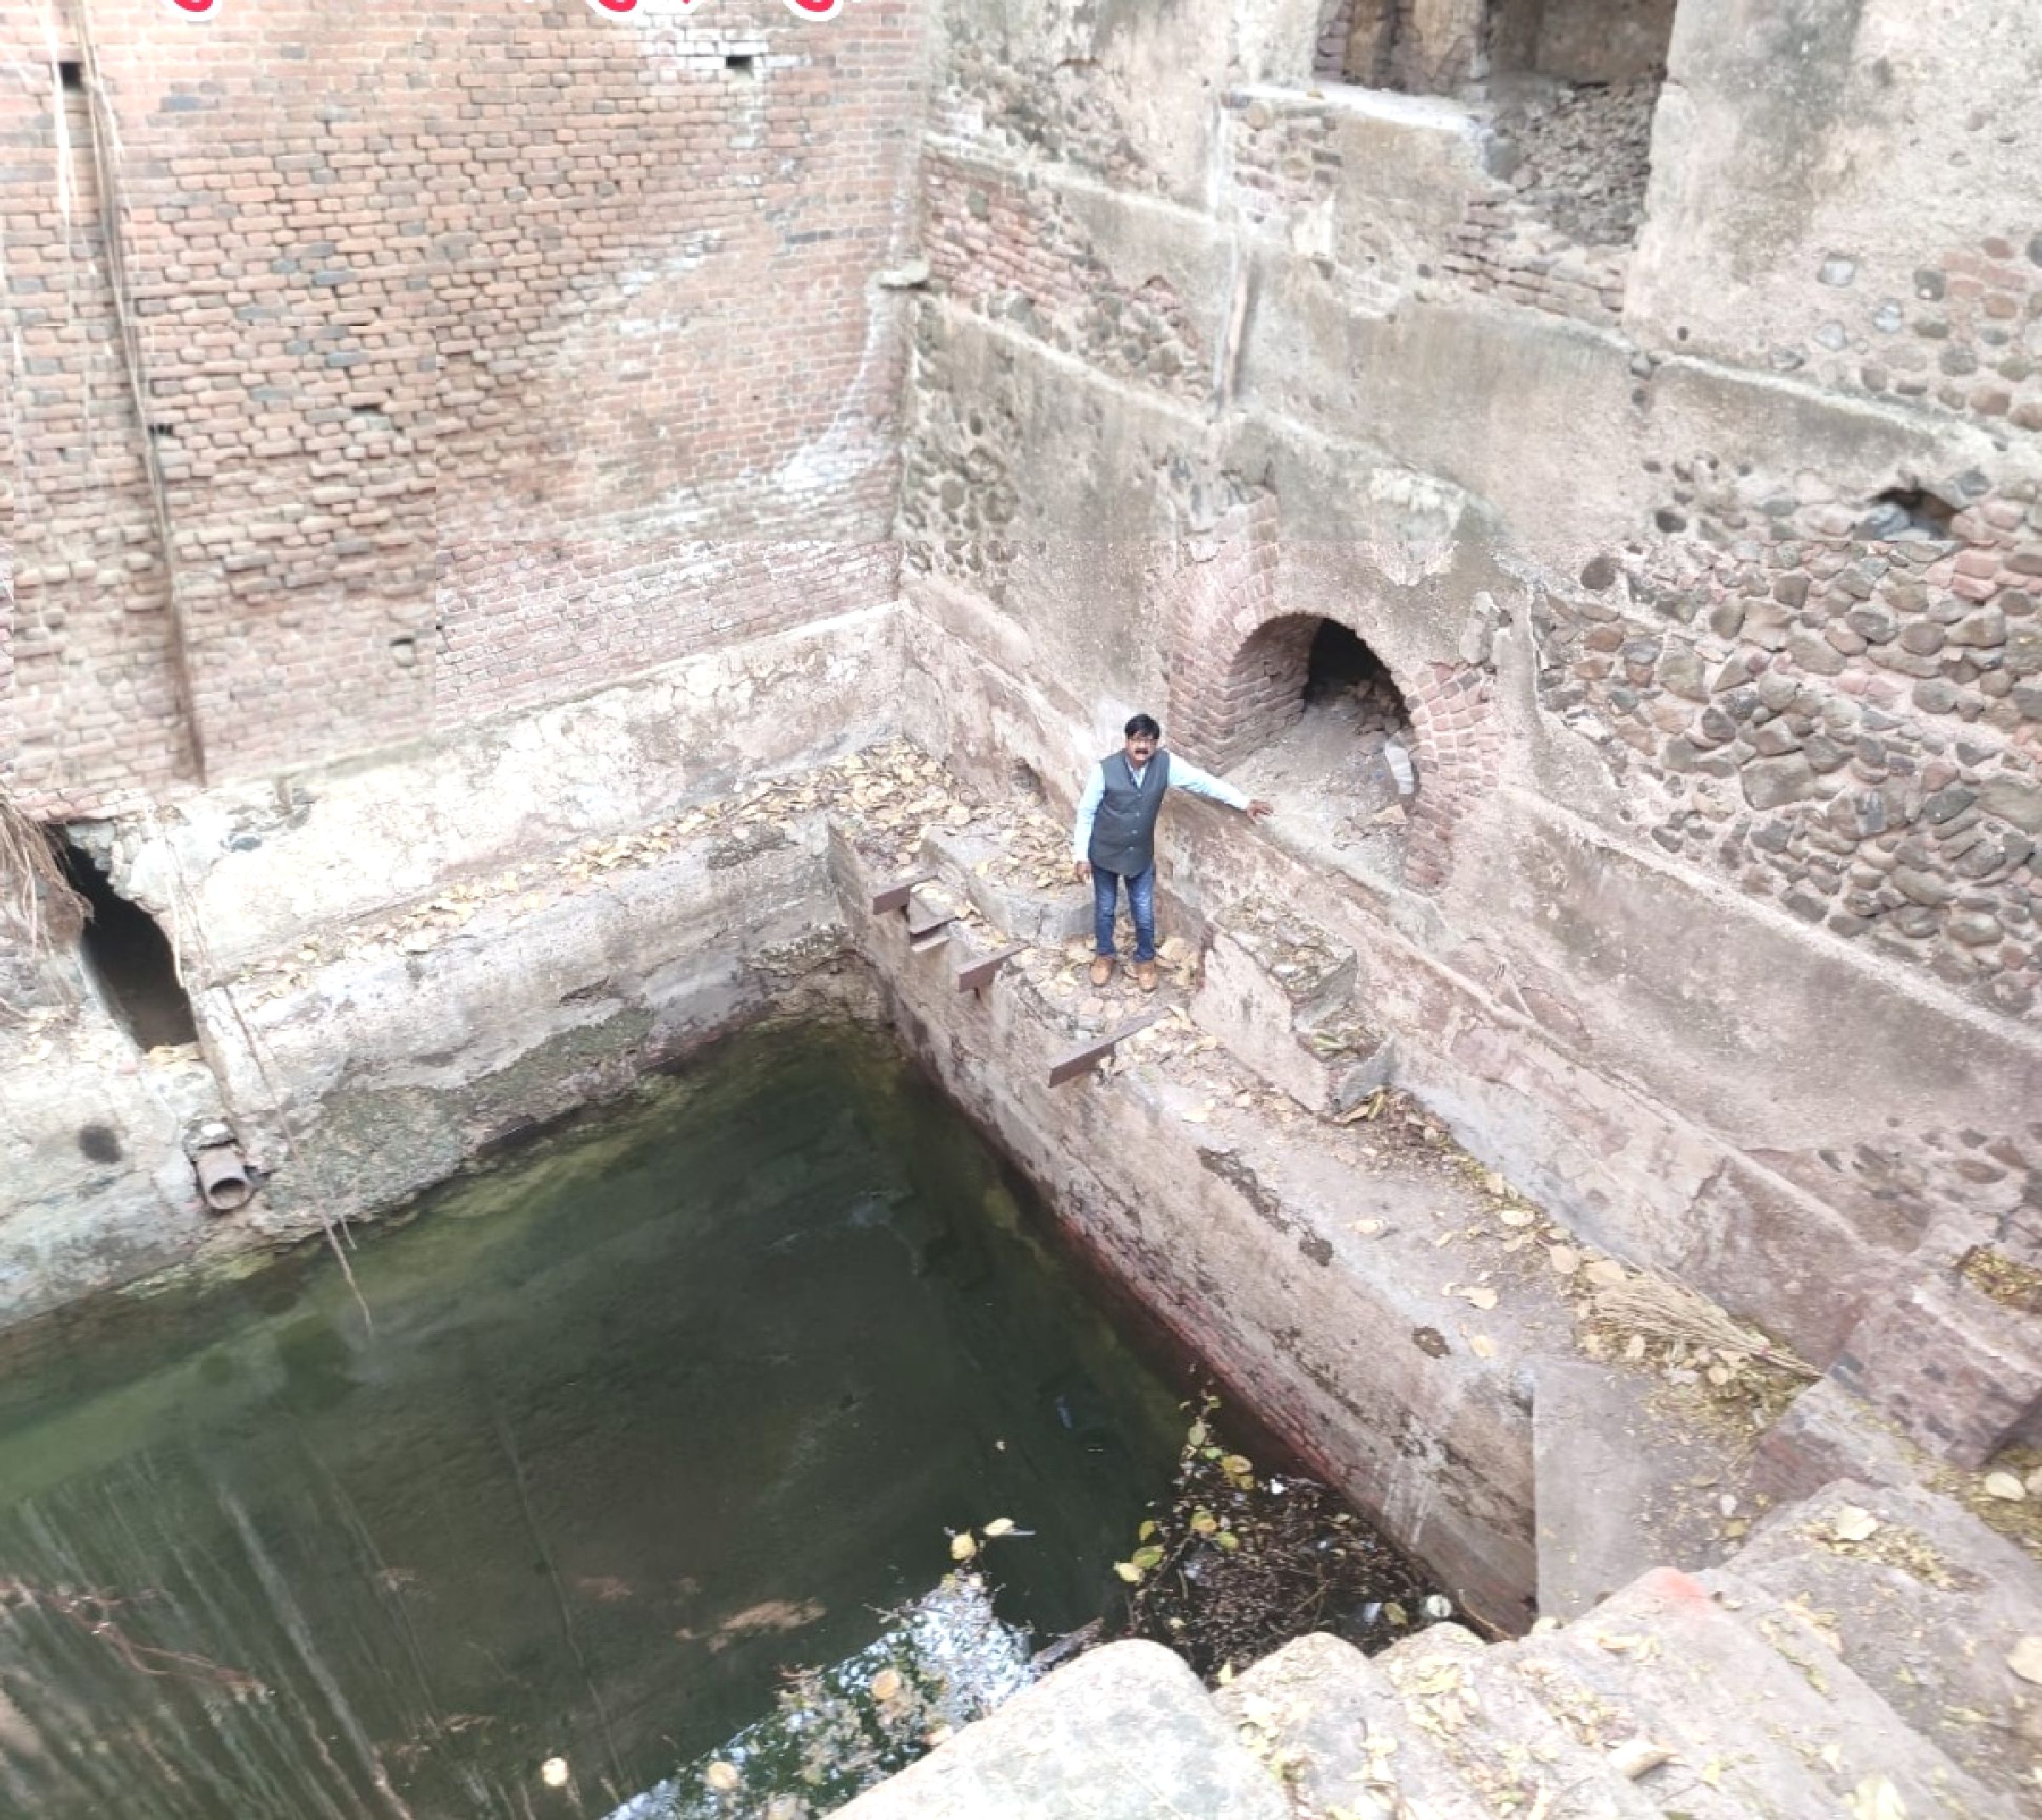 Ancient water structure signs extinct, water supply system stalled even from Kundi Bhandara